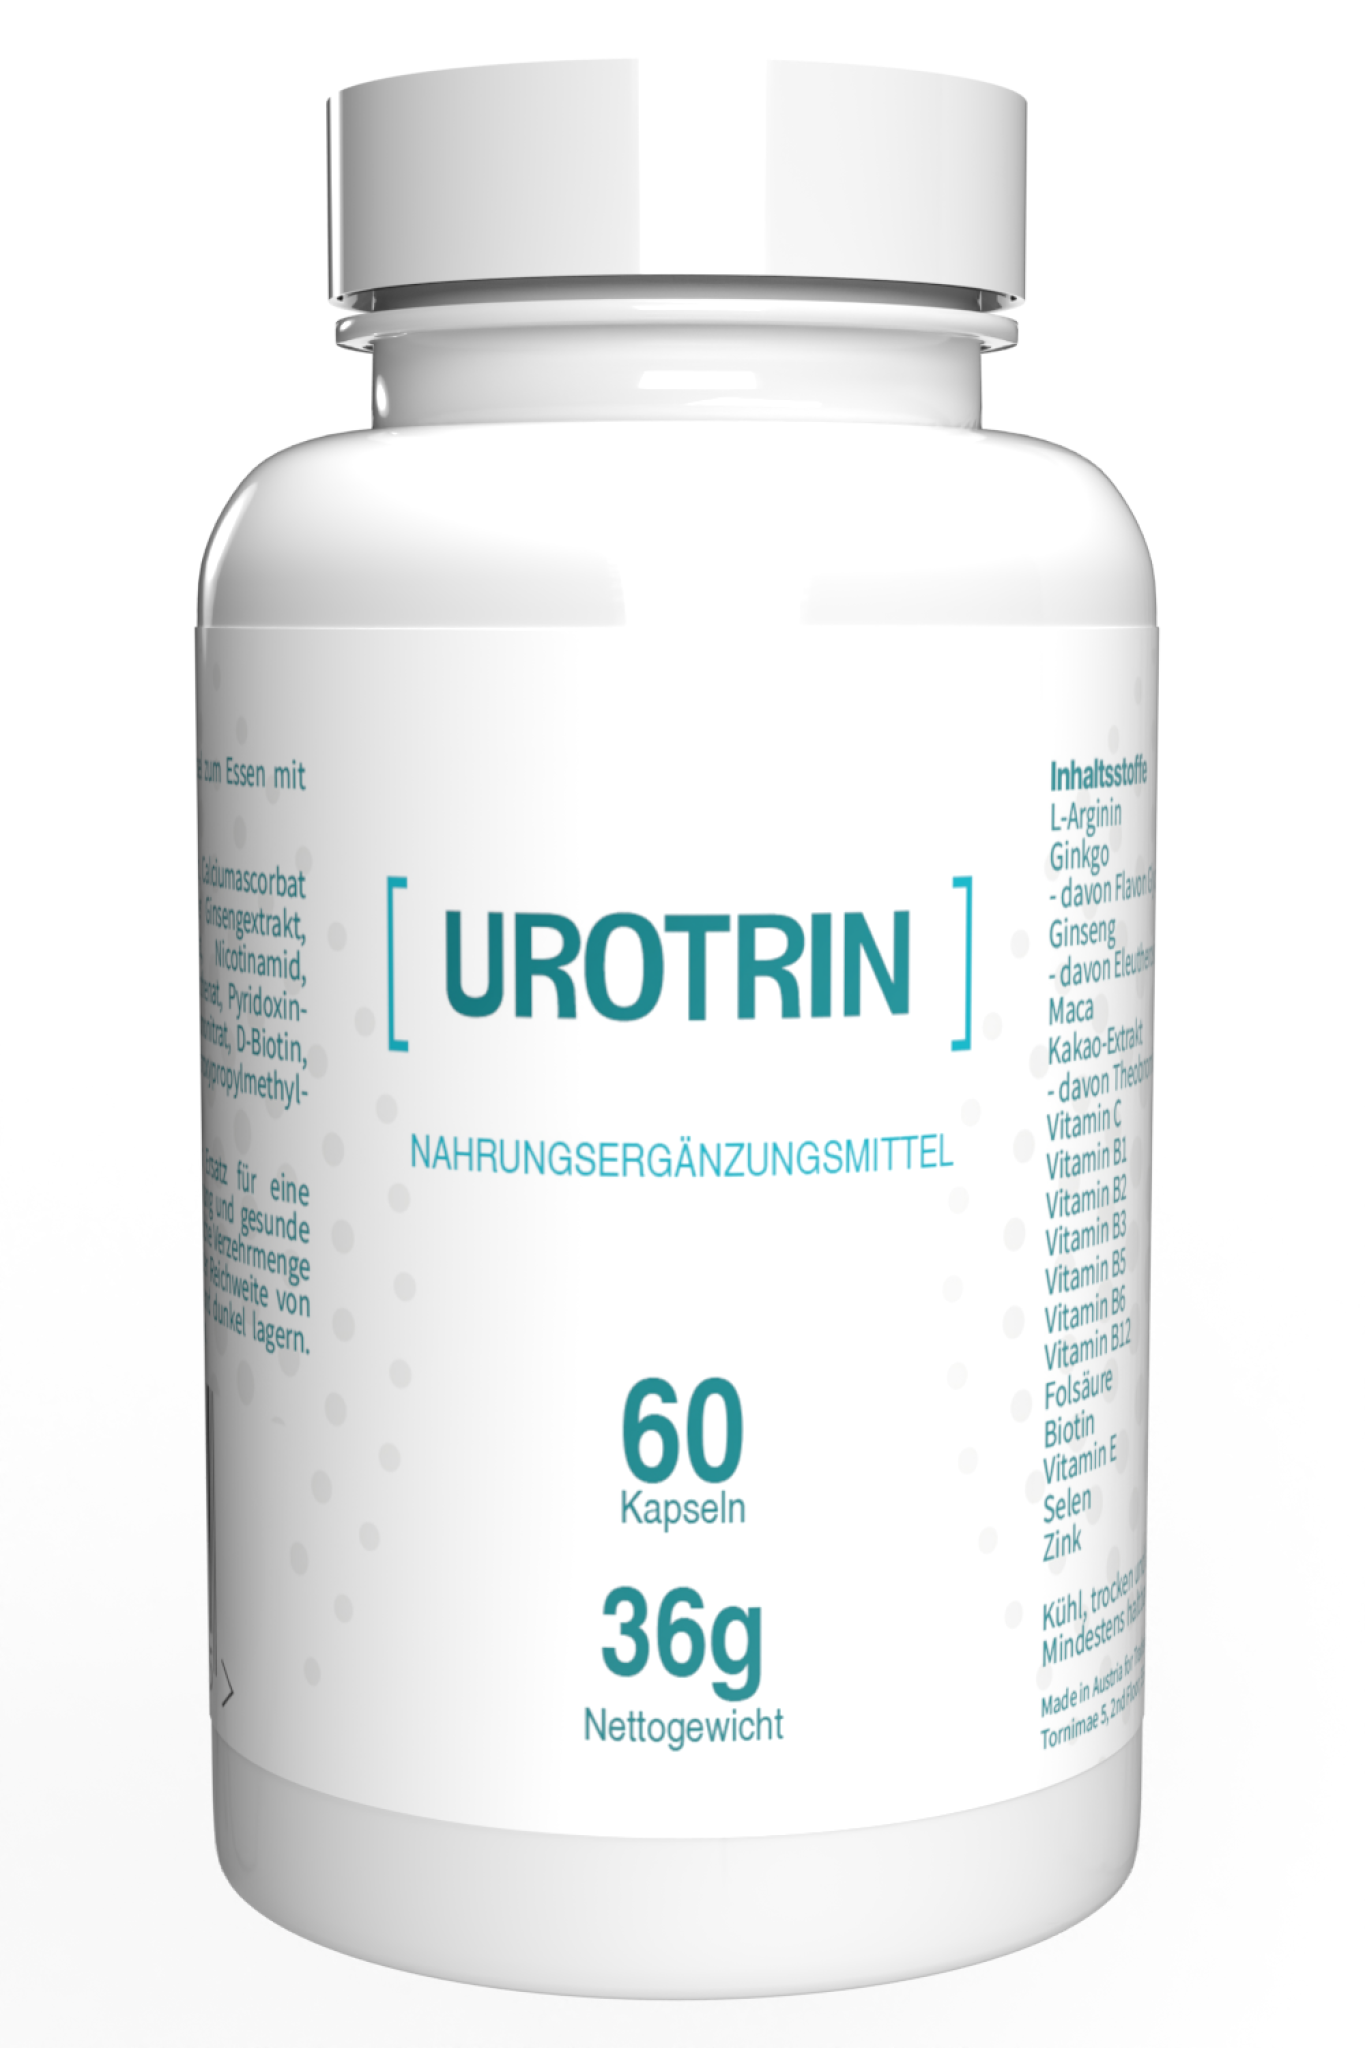 urotrin-15-new-test-reviews-prove-its-effectiveness